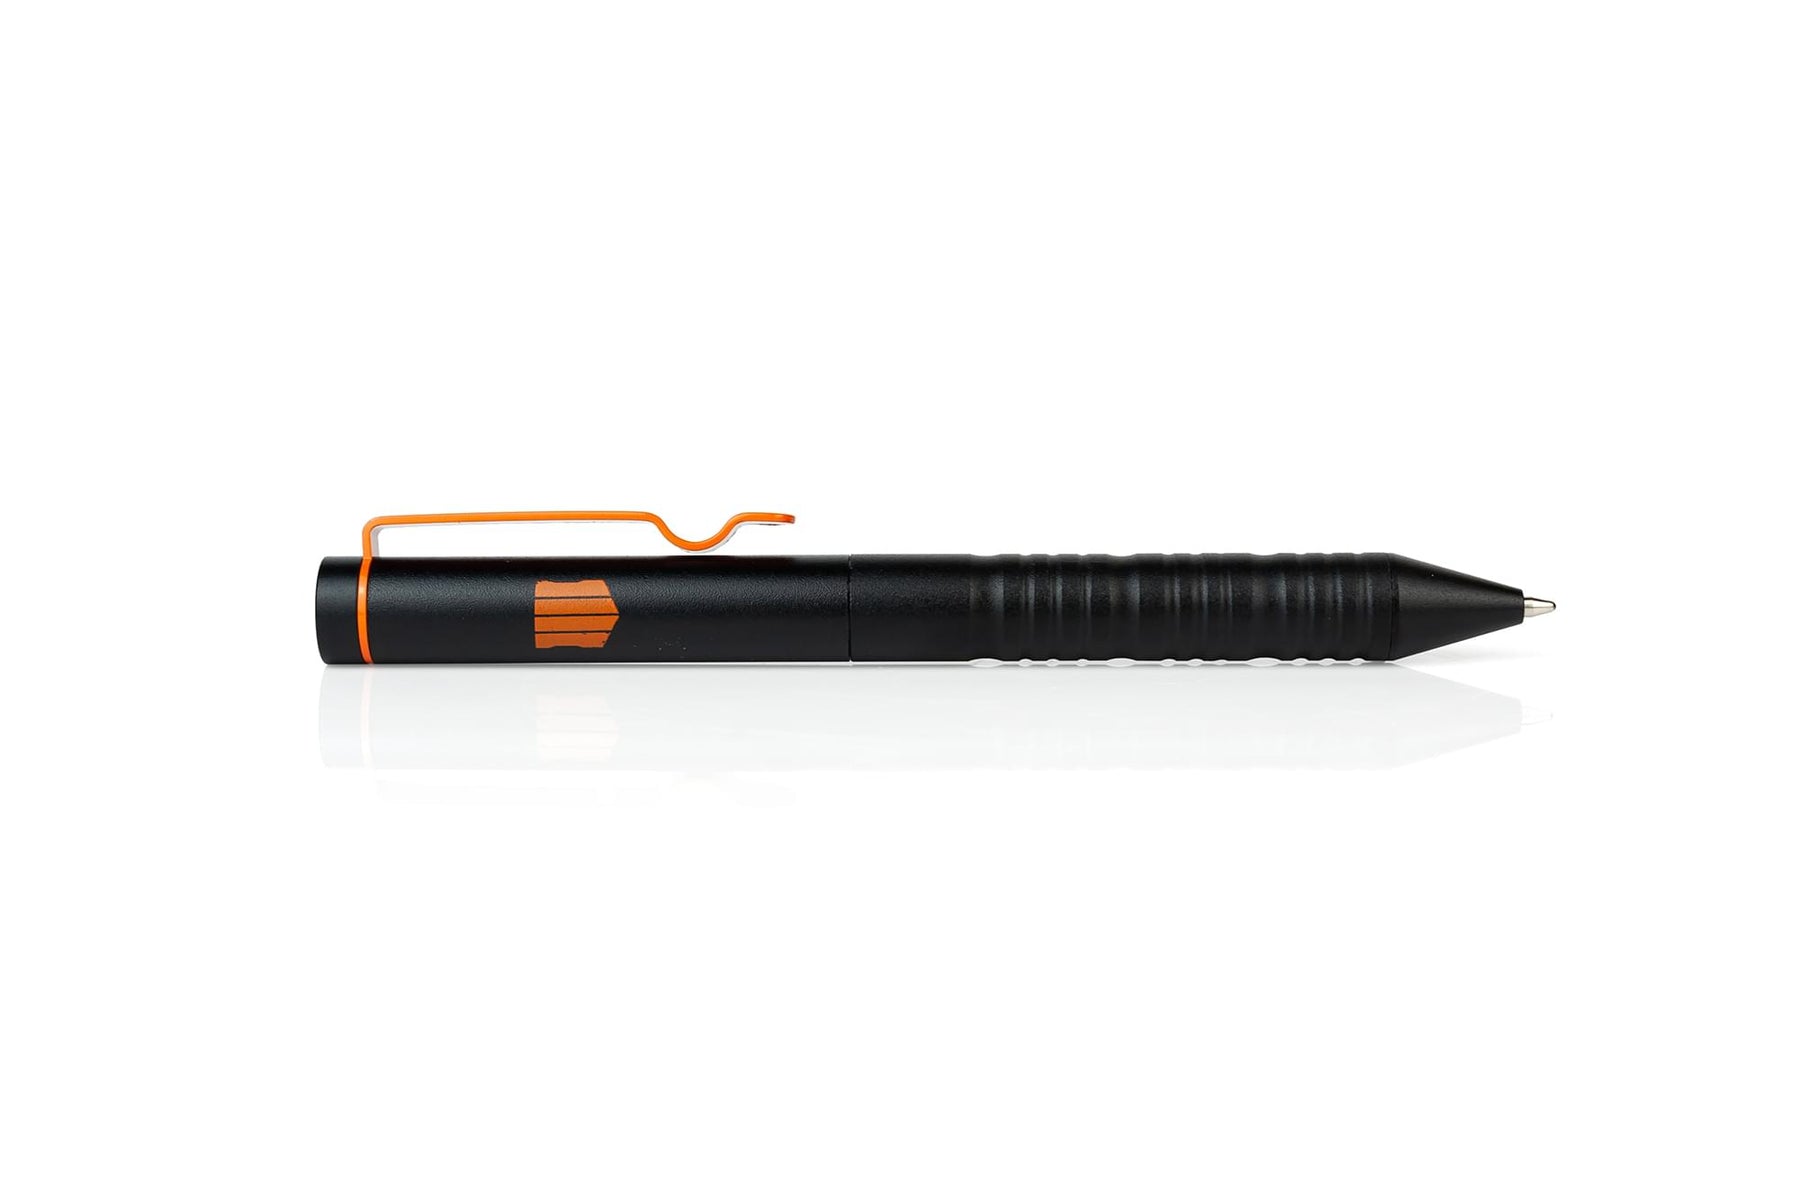 Call of Duty: Black Ops 4 Tactical Pen & Redaction Marker | Black Ops 4 Gift Set